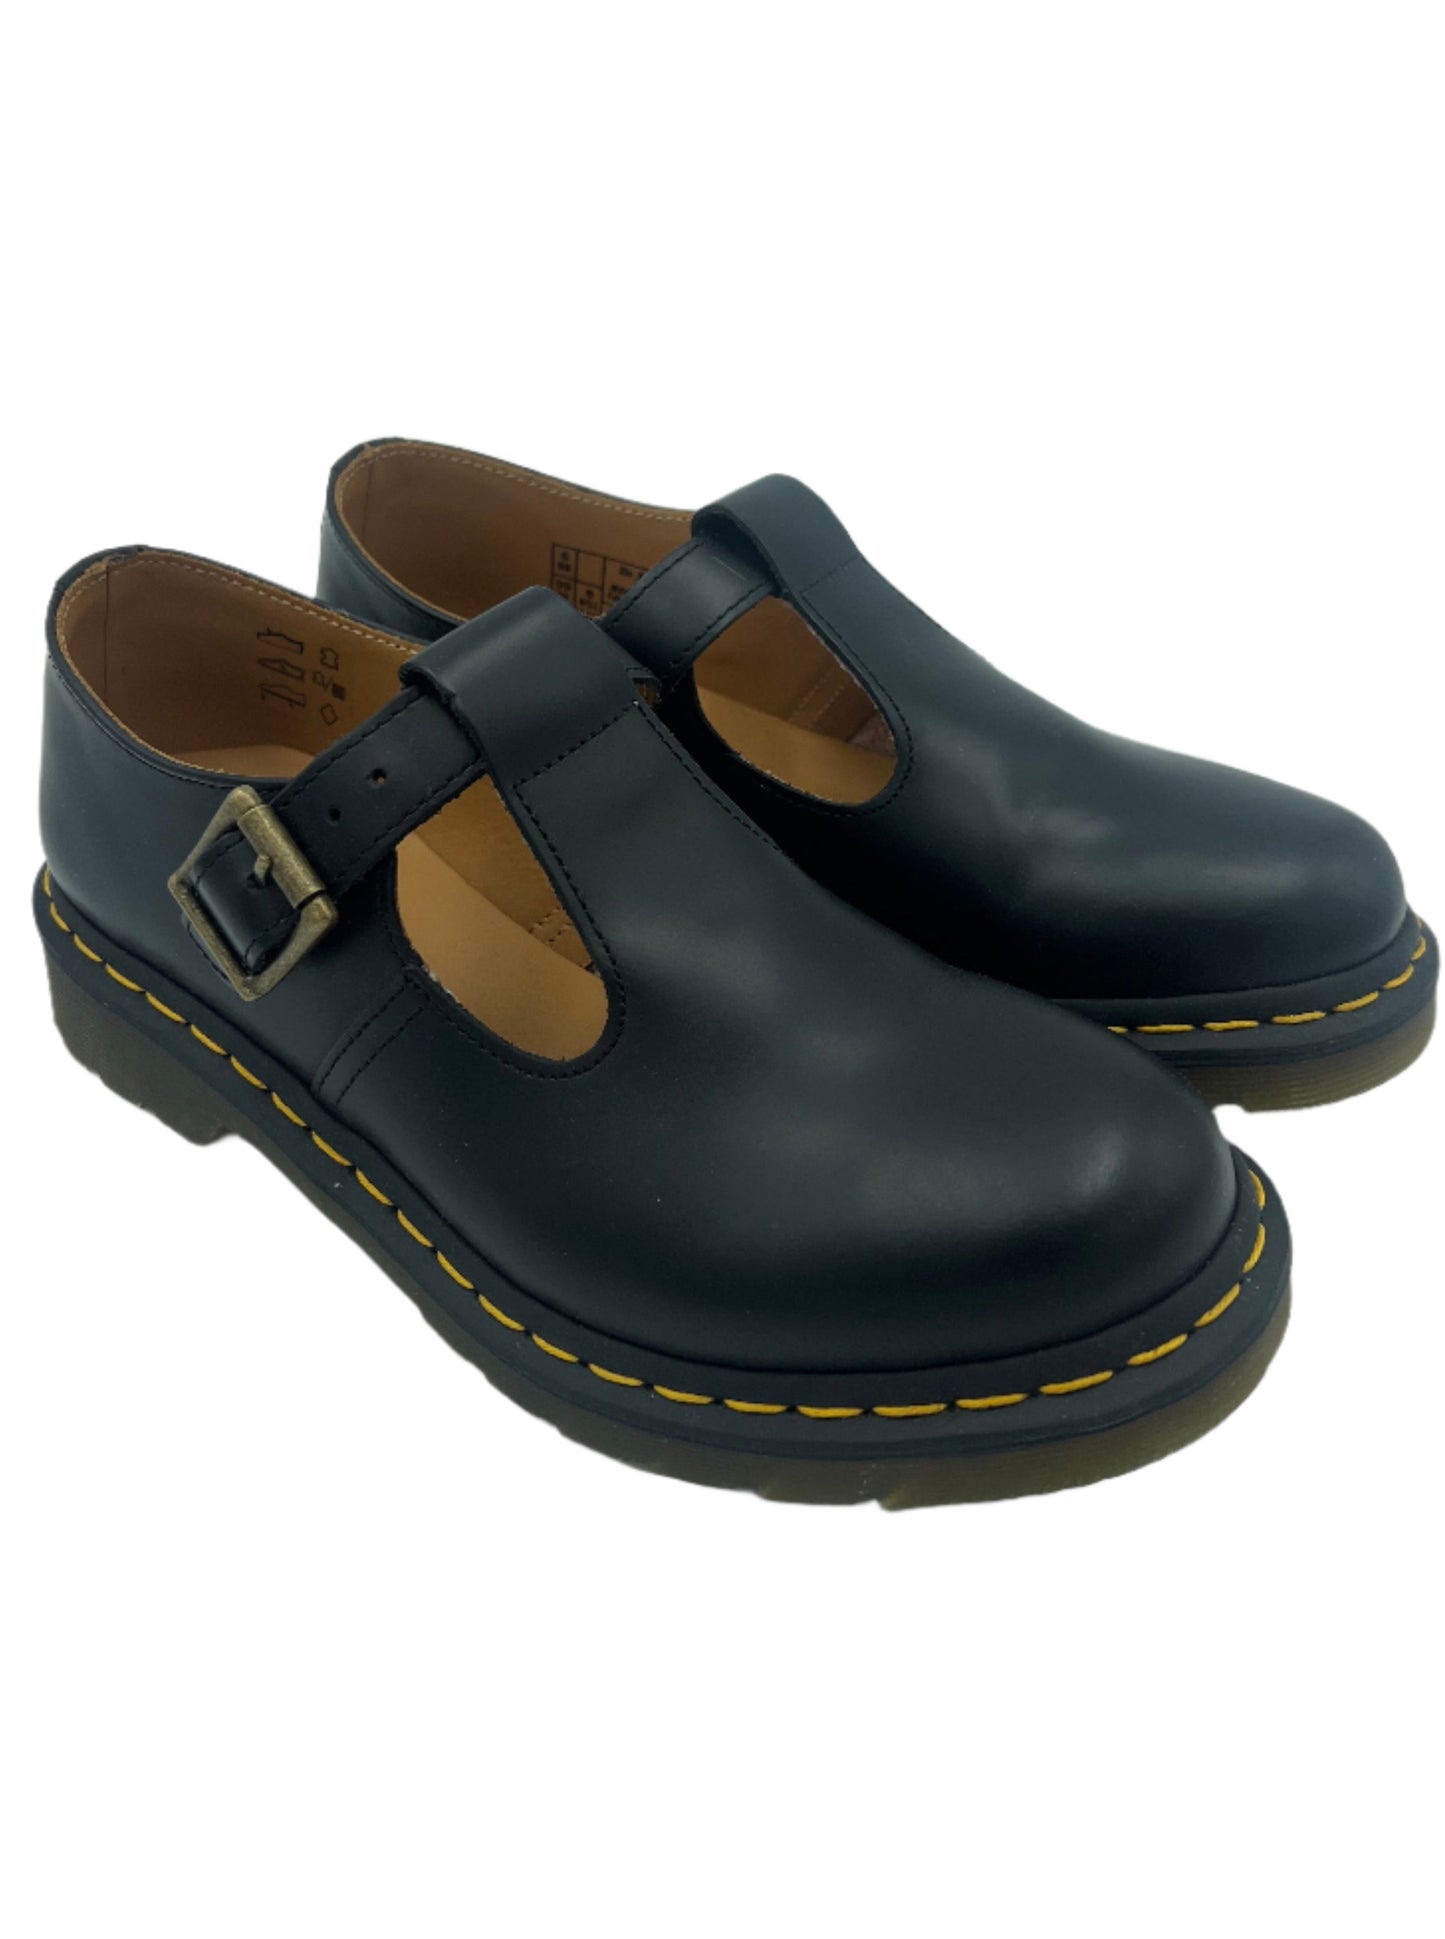 Like New! Dr Martens Polly Smooth Mary Janes, Size 8